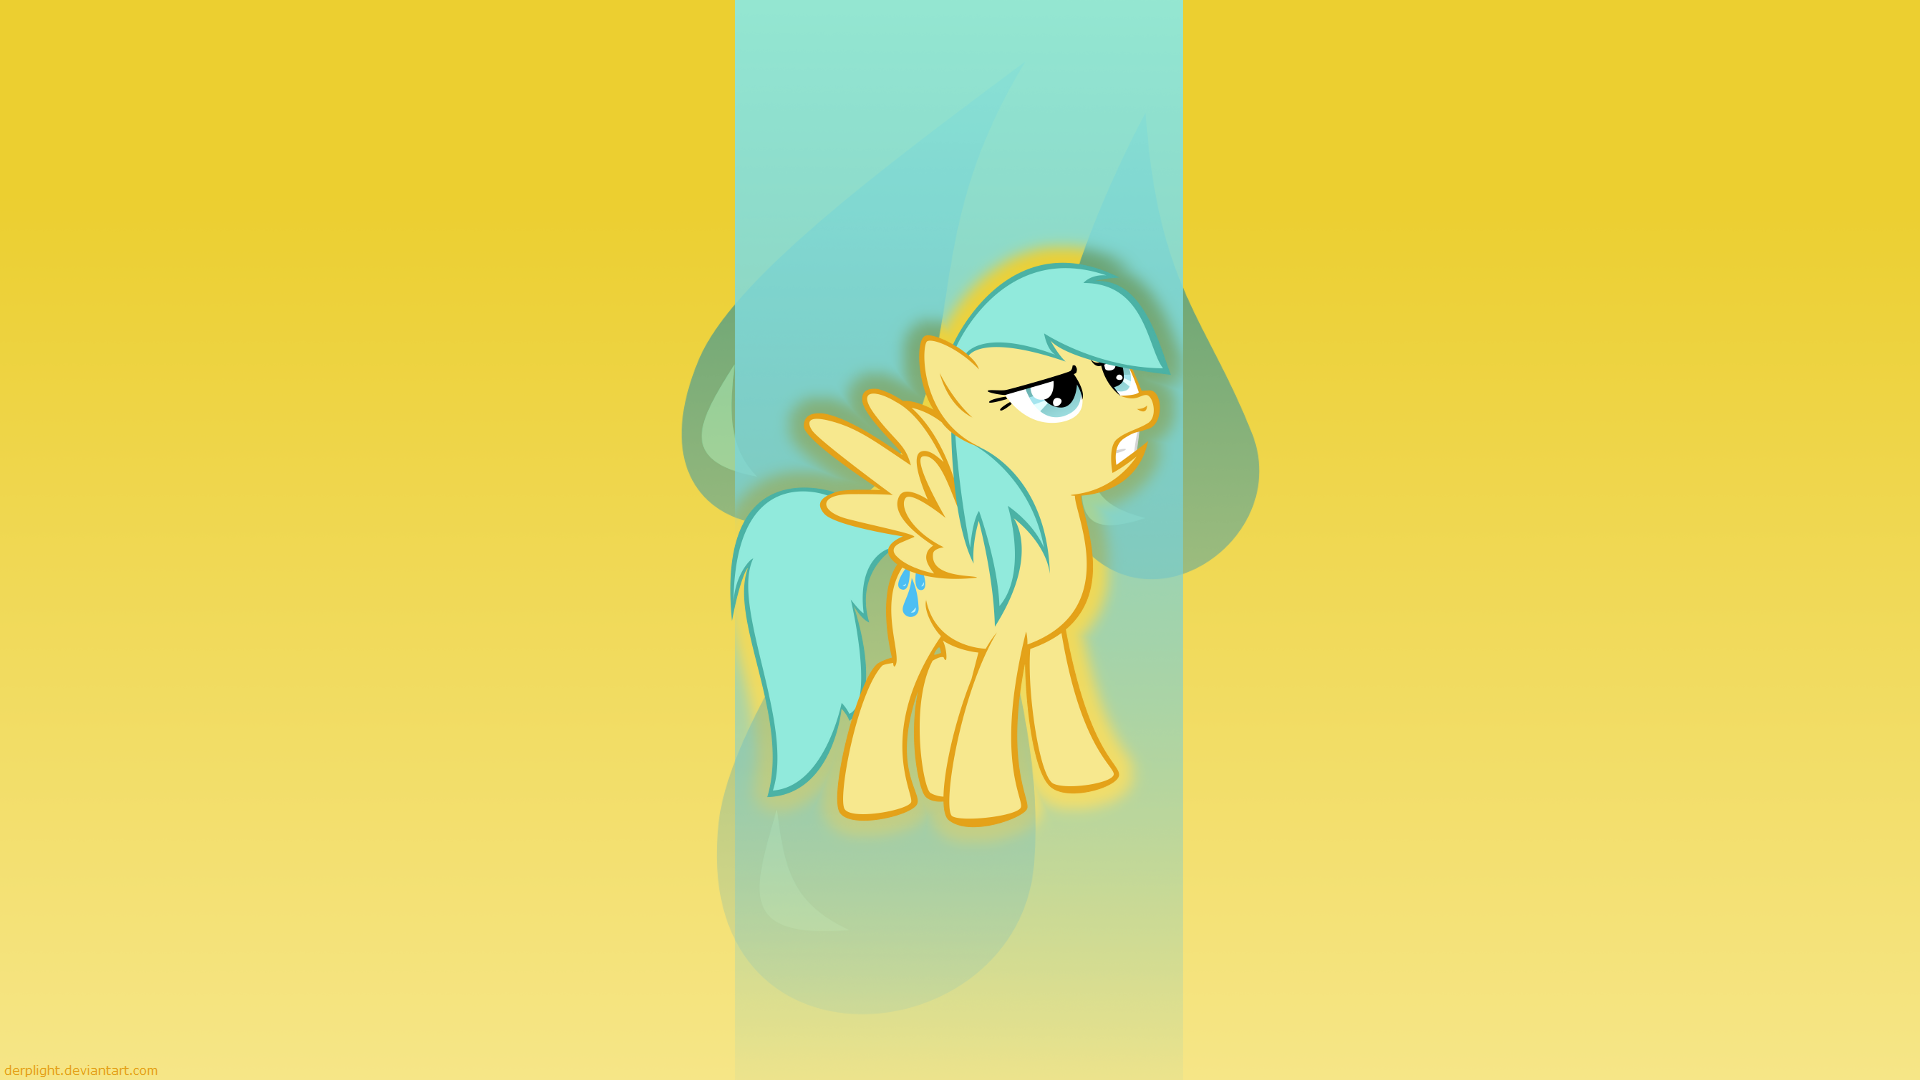 Raindrops Wallpaper by Alecza1234, DerpLight and The-Smiling-Pony